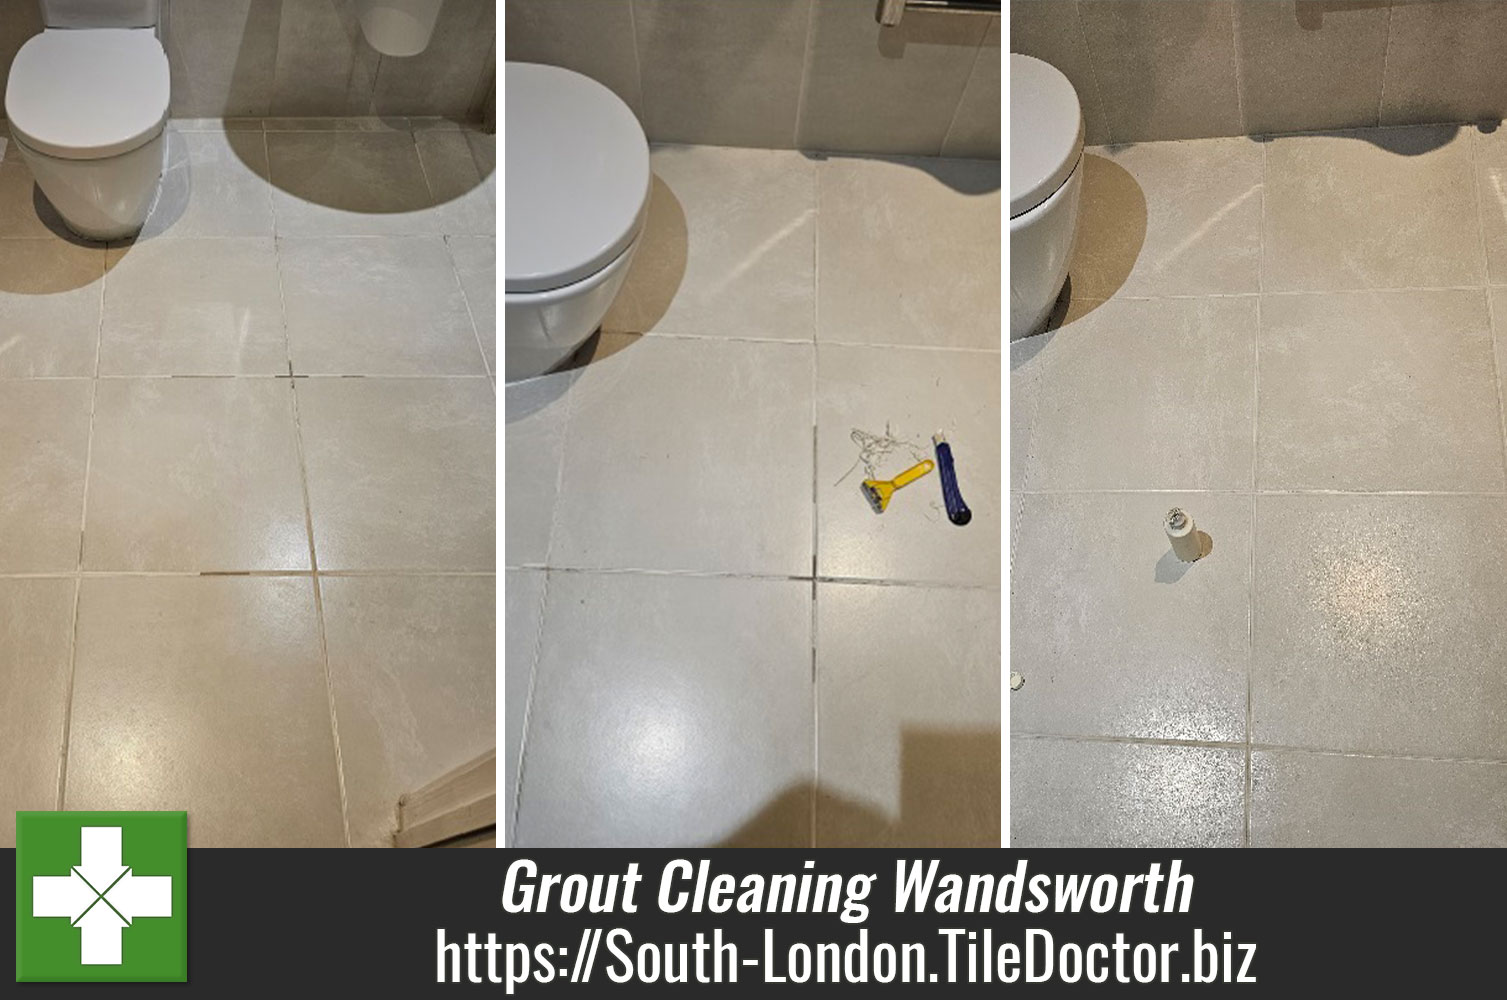 Tile Doctor Grout Colourant Used to Restore a Porcelain Tiled Bathroom Floor in Wandsworth